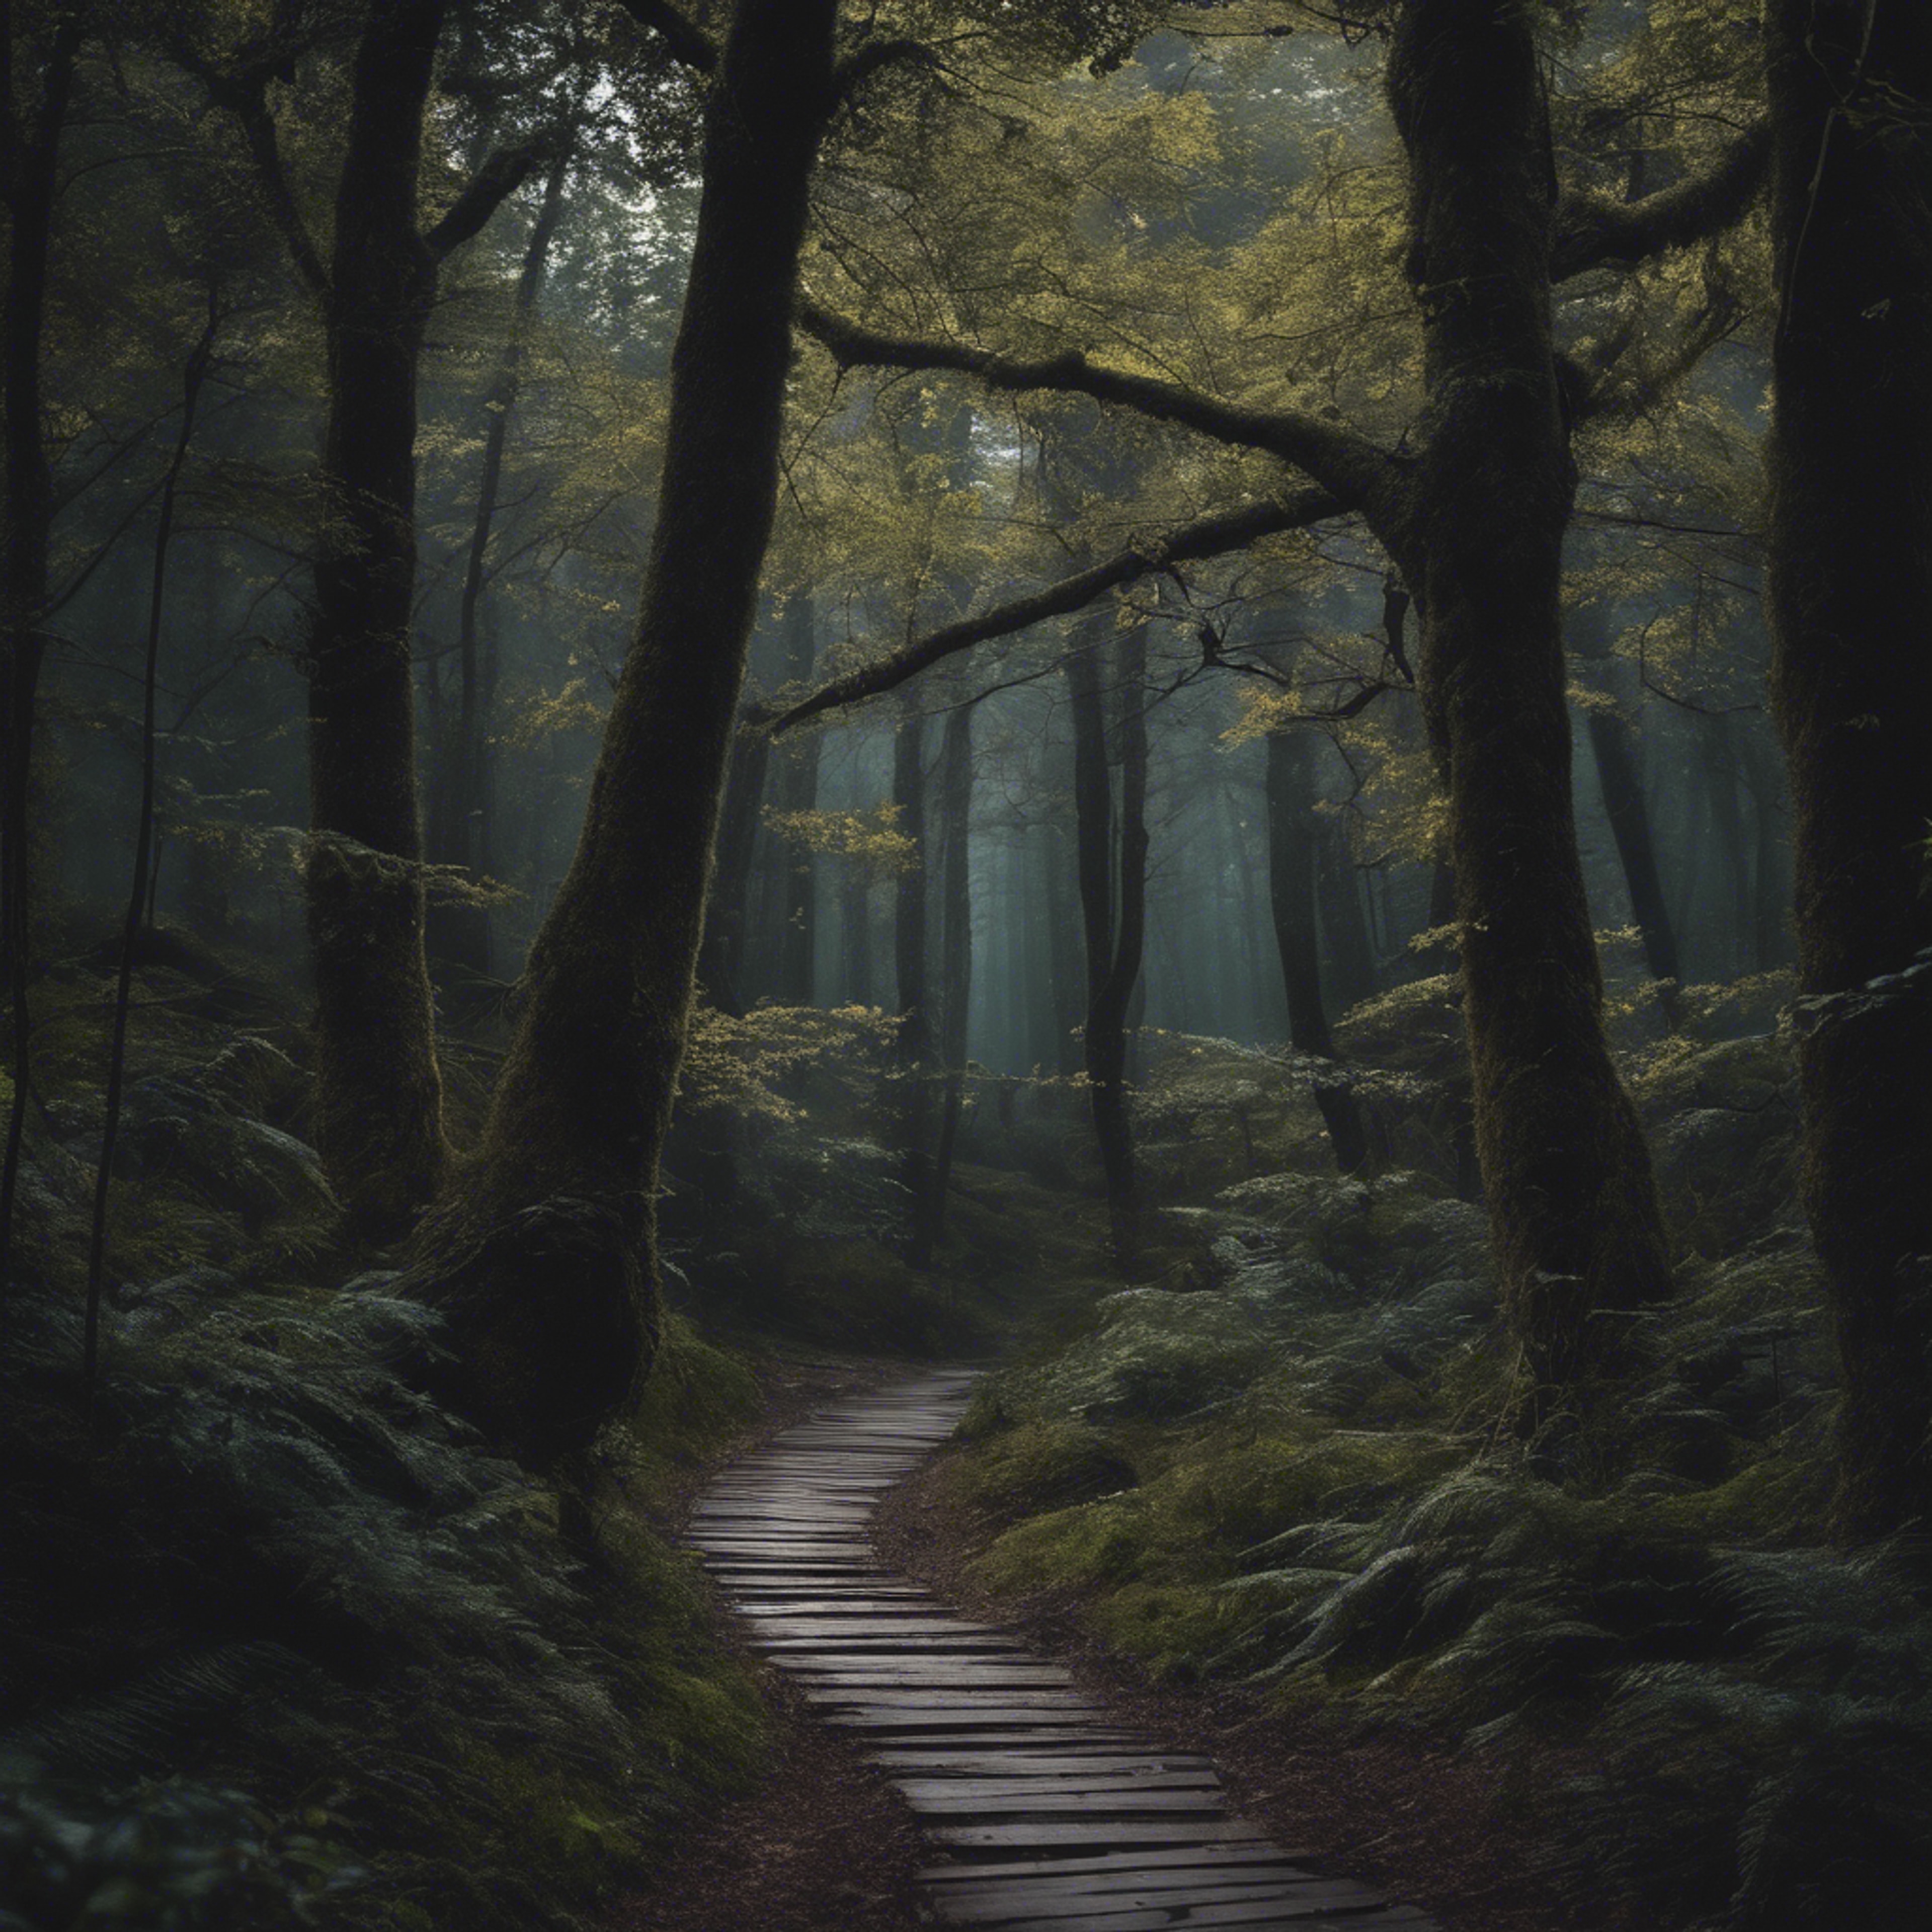 An untraveled path in a dark and mysterious forest Tapeta[df6a1d860b87482e8c75]